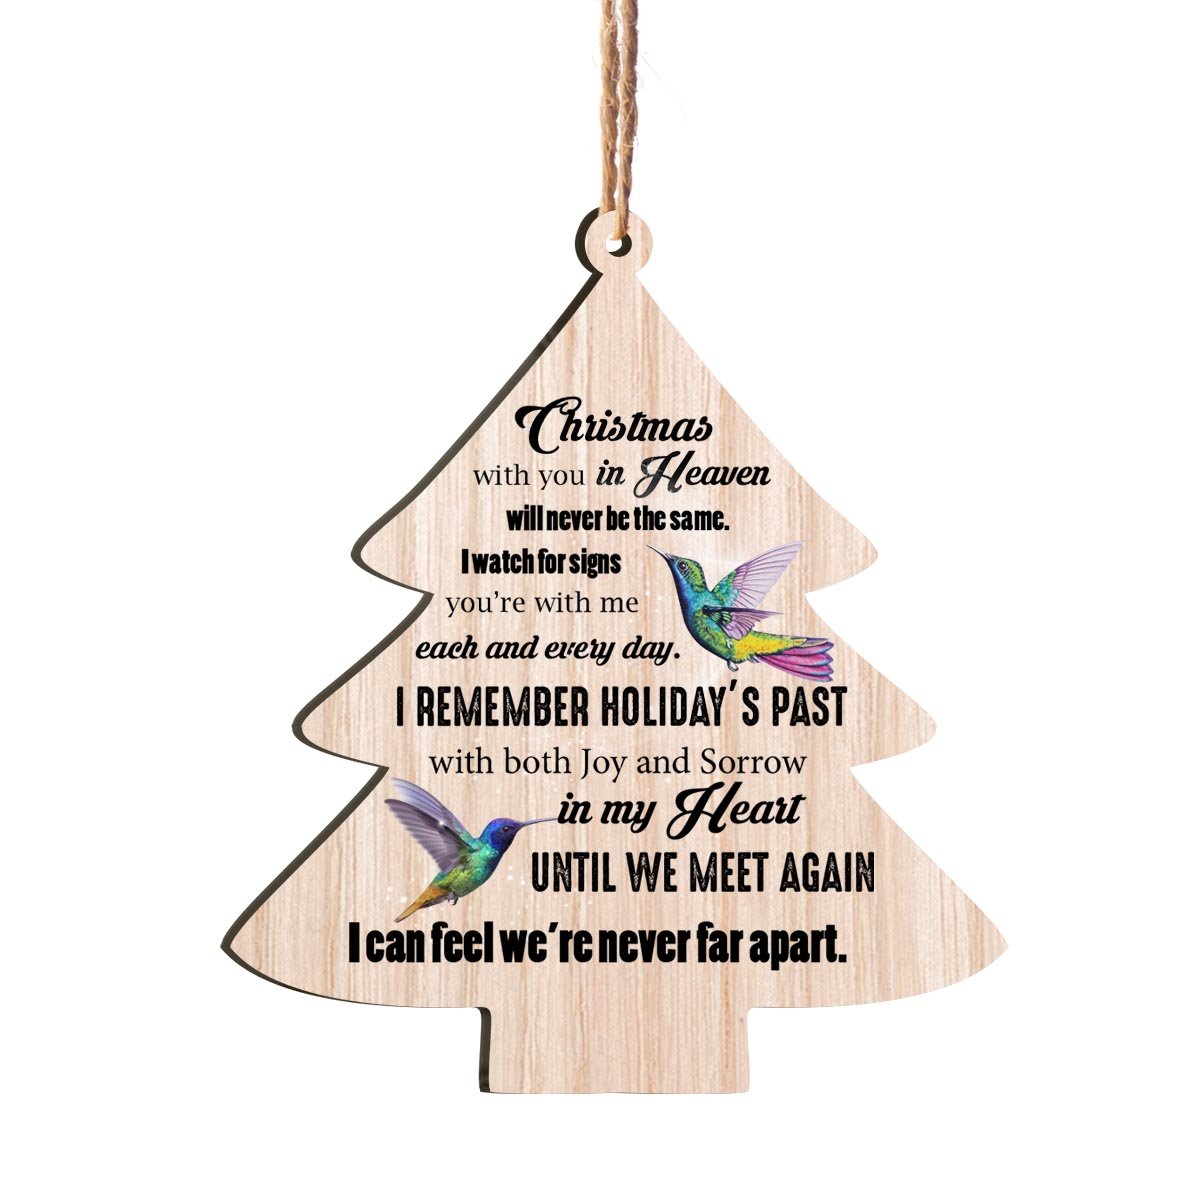 Hummingbird Christmas In Heaven Personalizedwitch Christmas Printed Wood Memorial Ornament